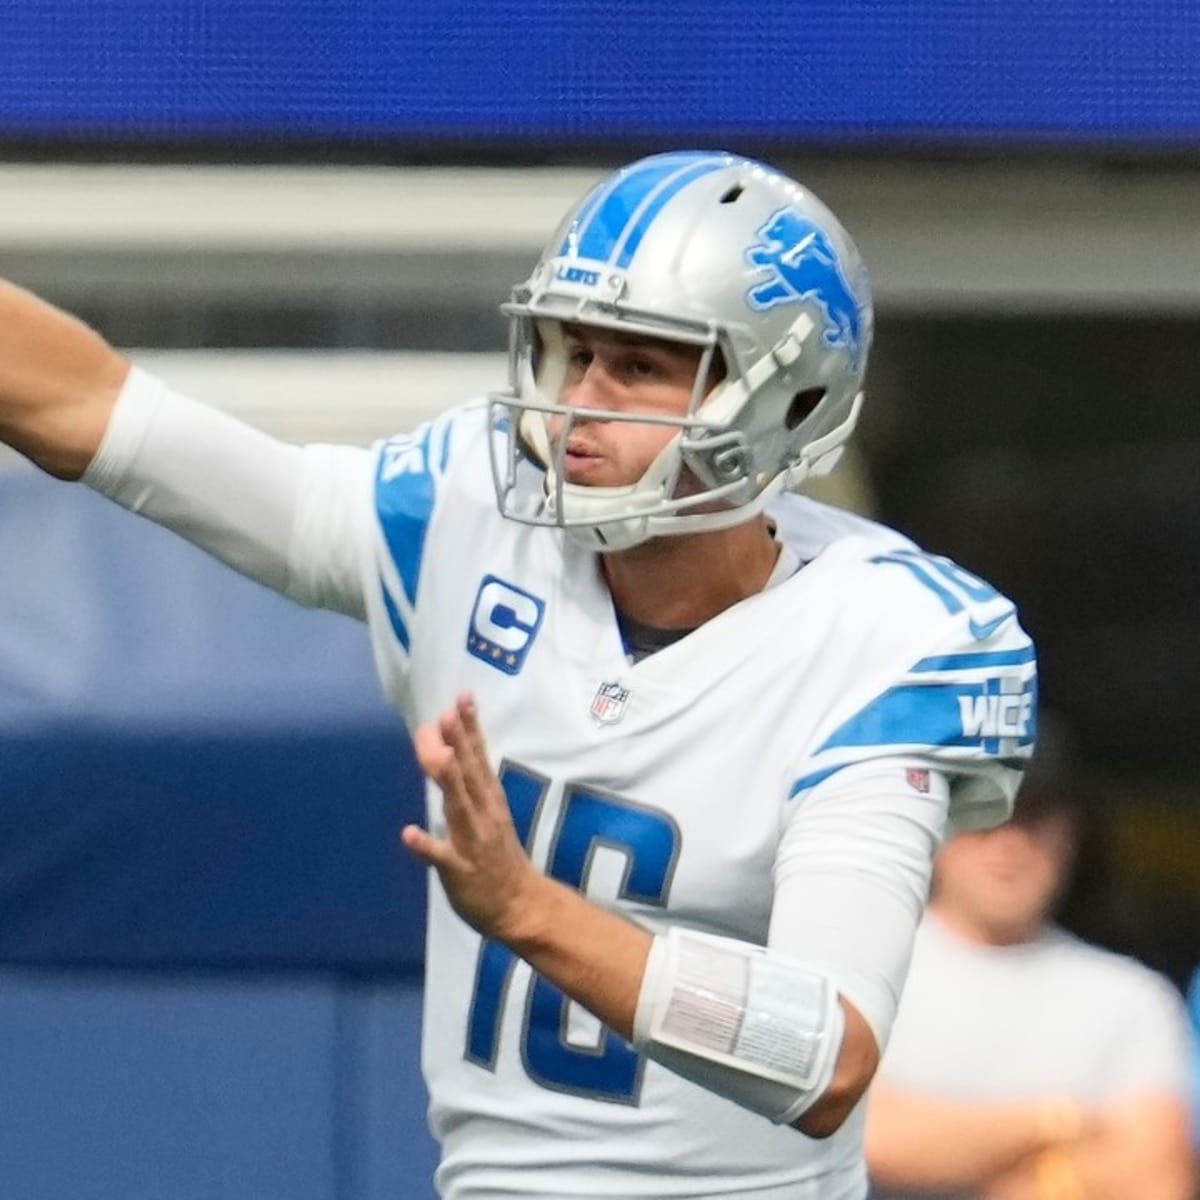 Stafford: 'It was humbling' seeing his Lions jersey at Sofi